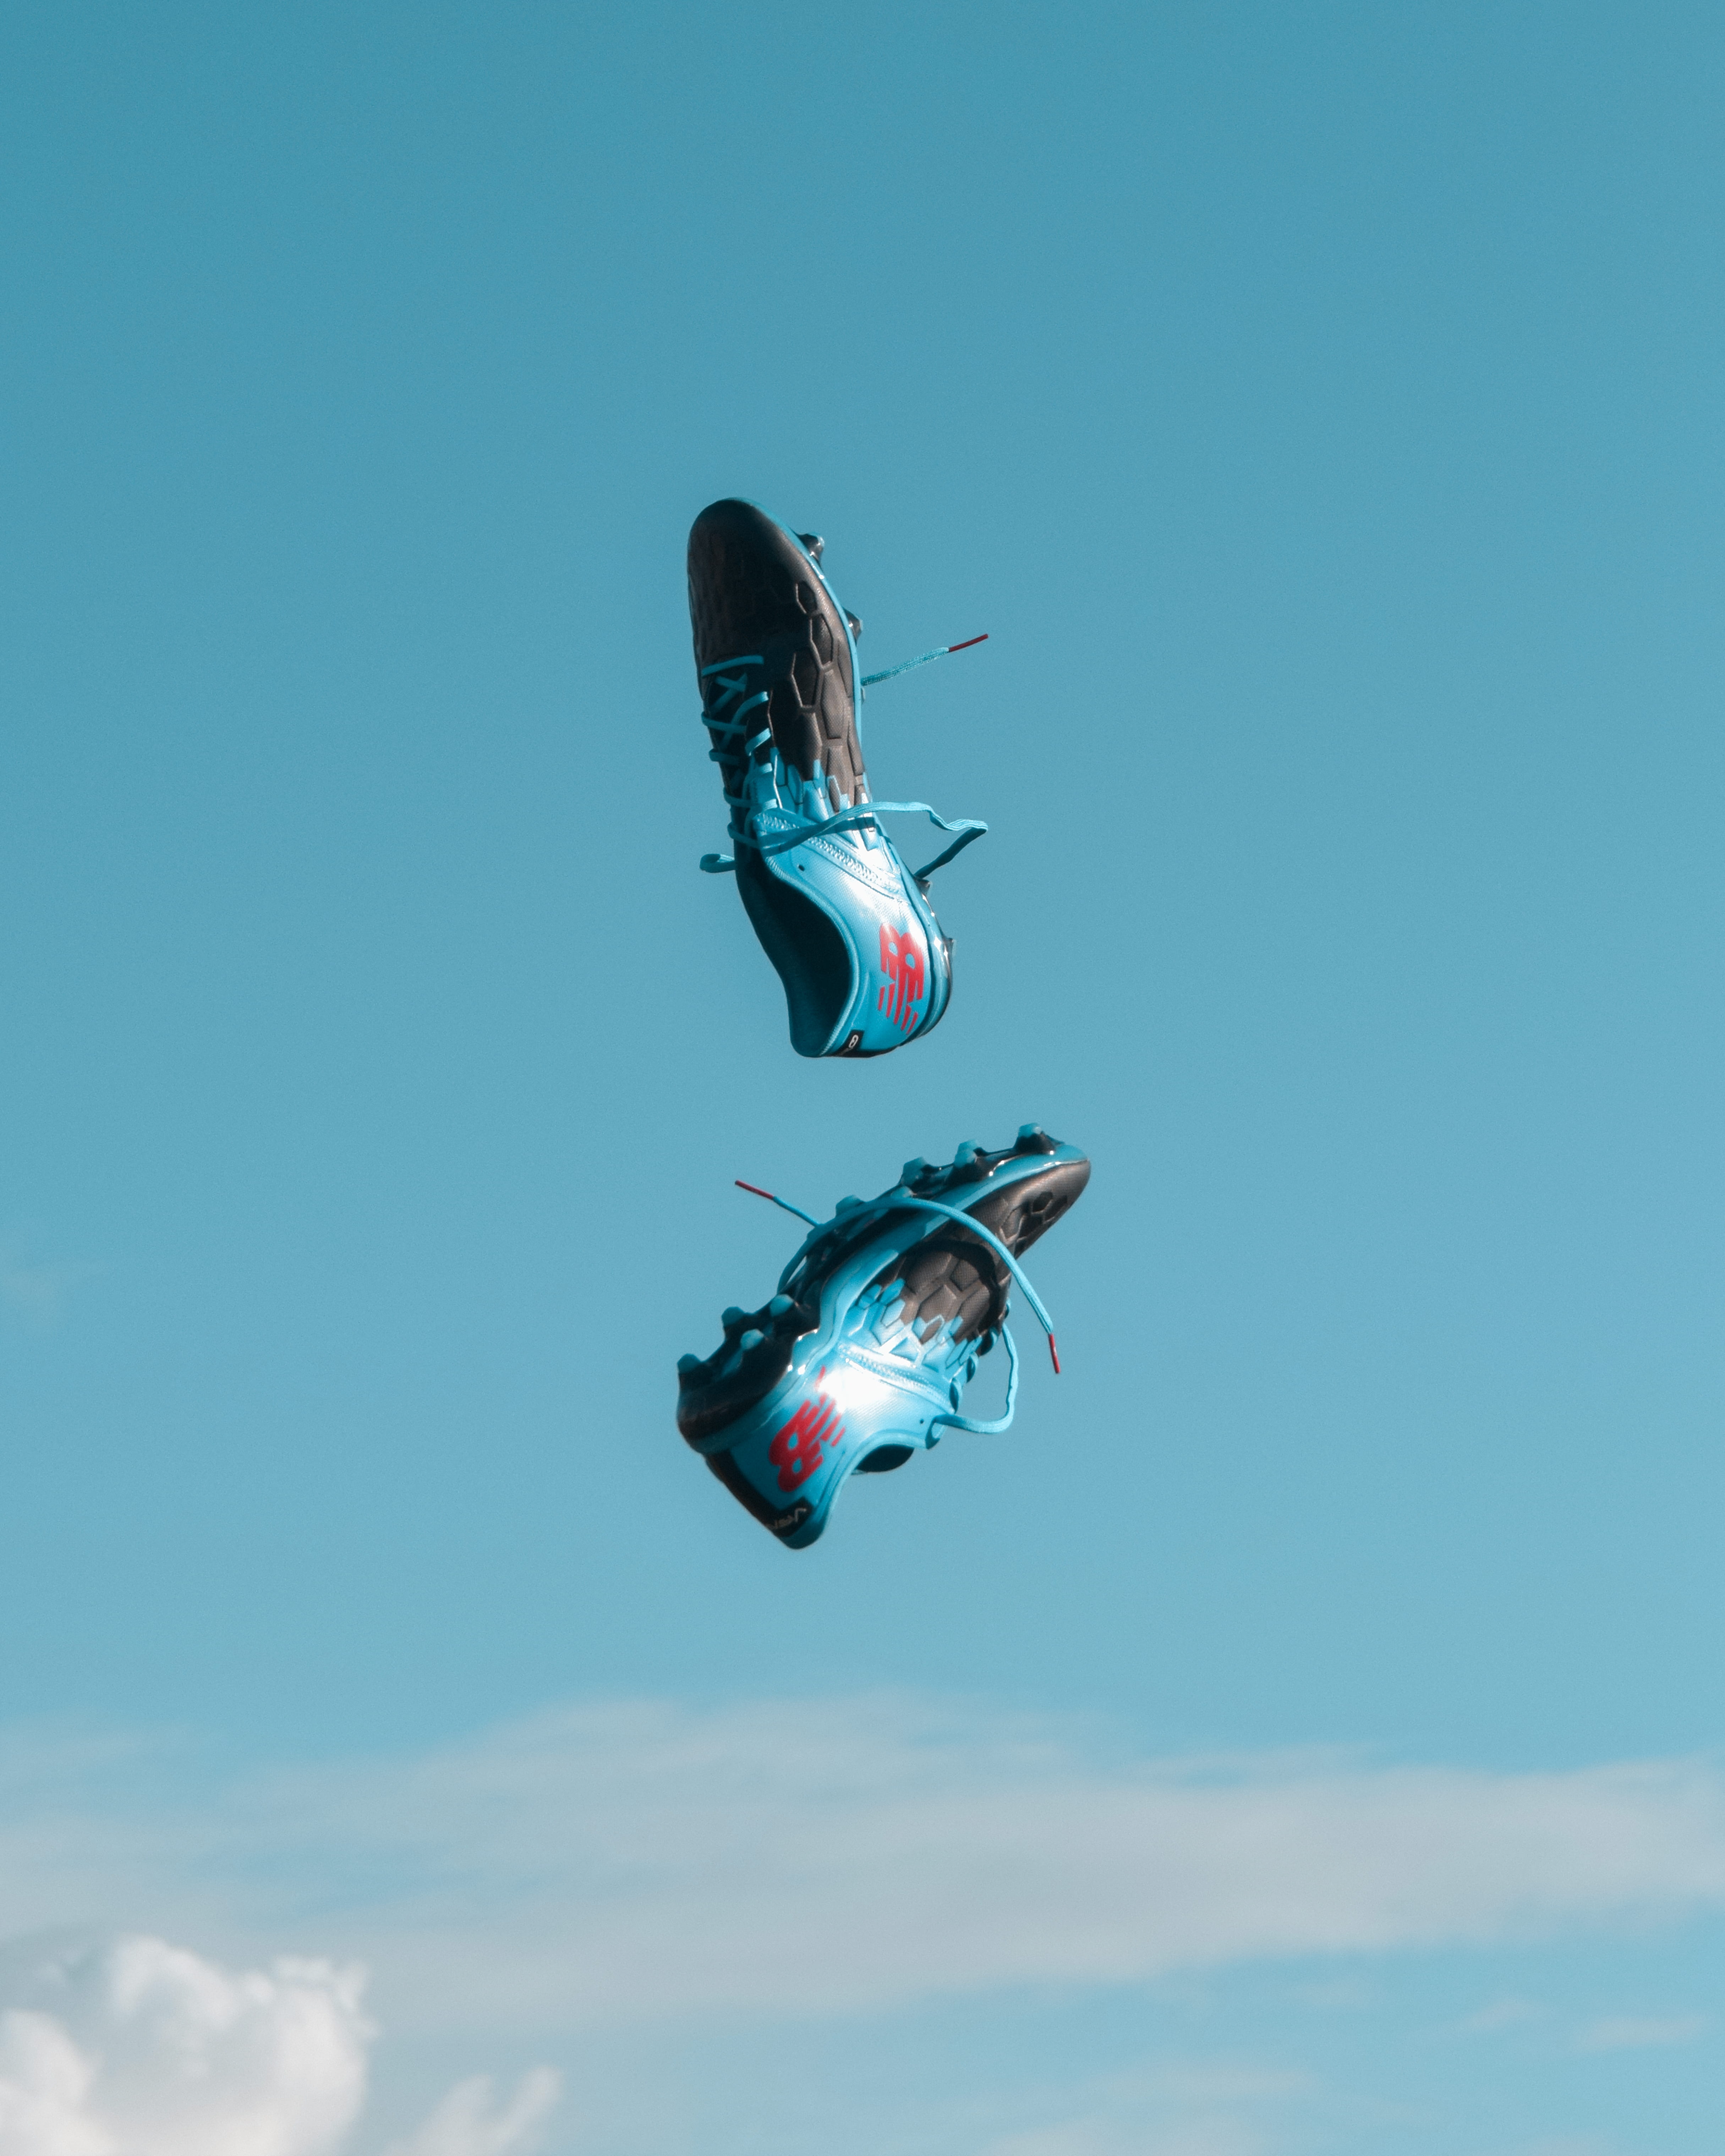 pair of blue-and-black New Balance cleats in the air under teal sky with white clouds, pair of black-and-blue New Balance cleats in air